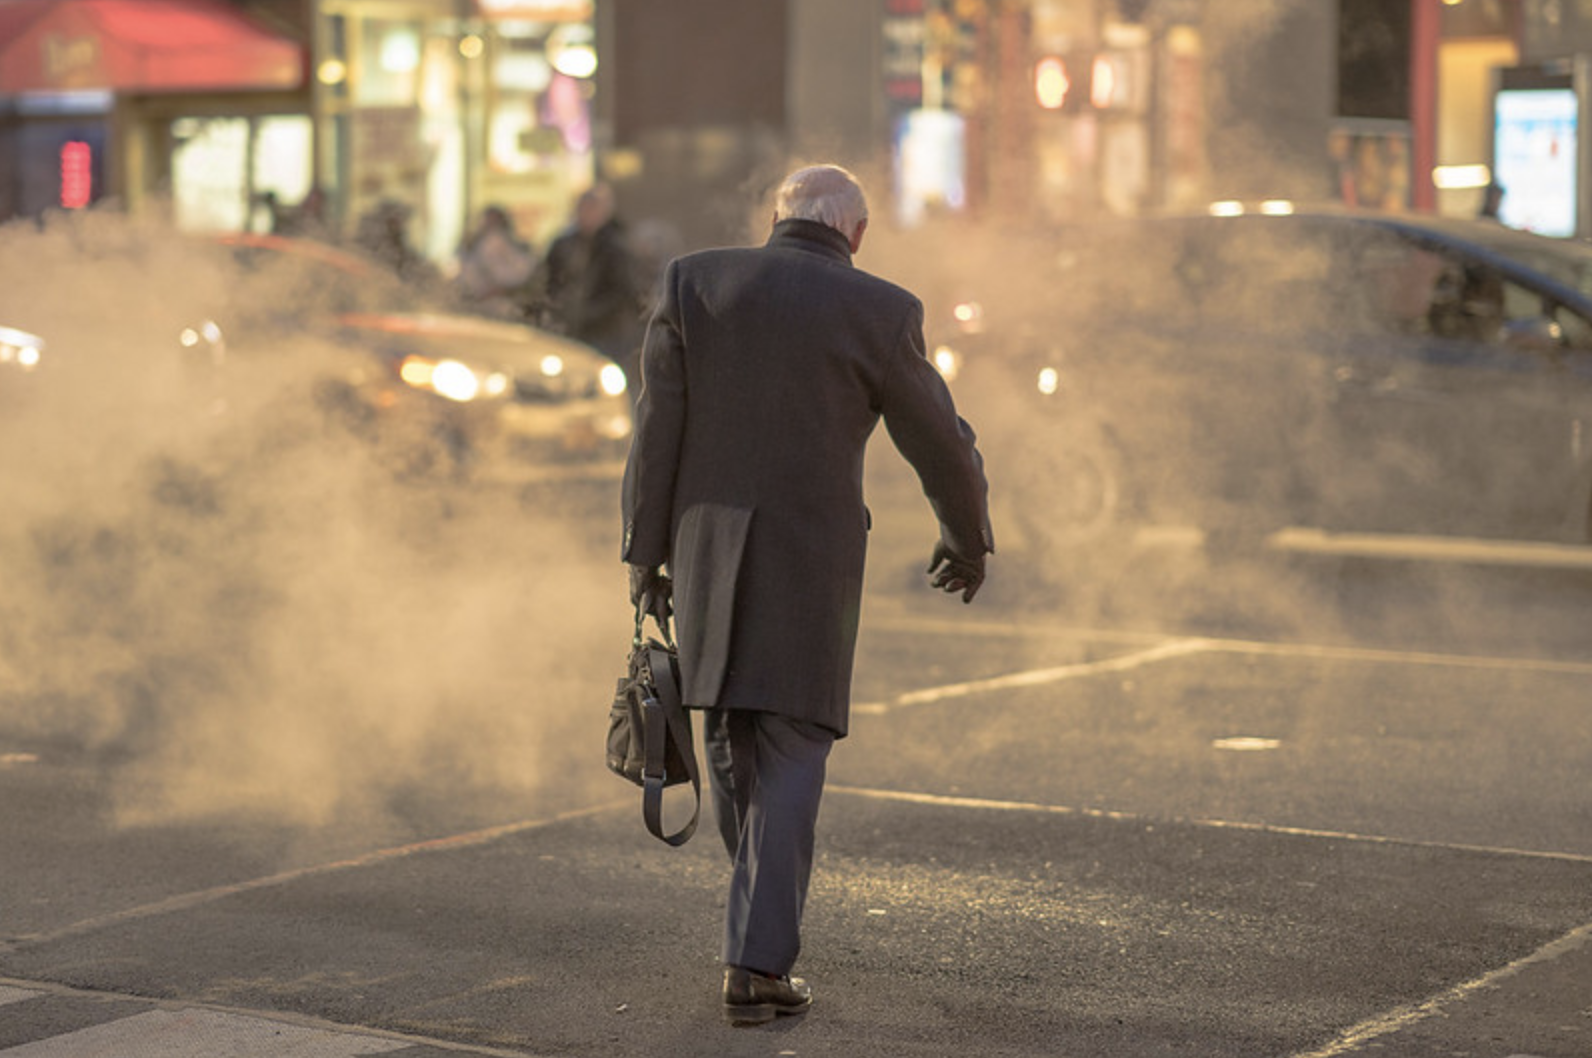 A man wearing an overcoat and gloves is seen walking from behind in Manhattan.